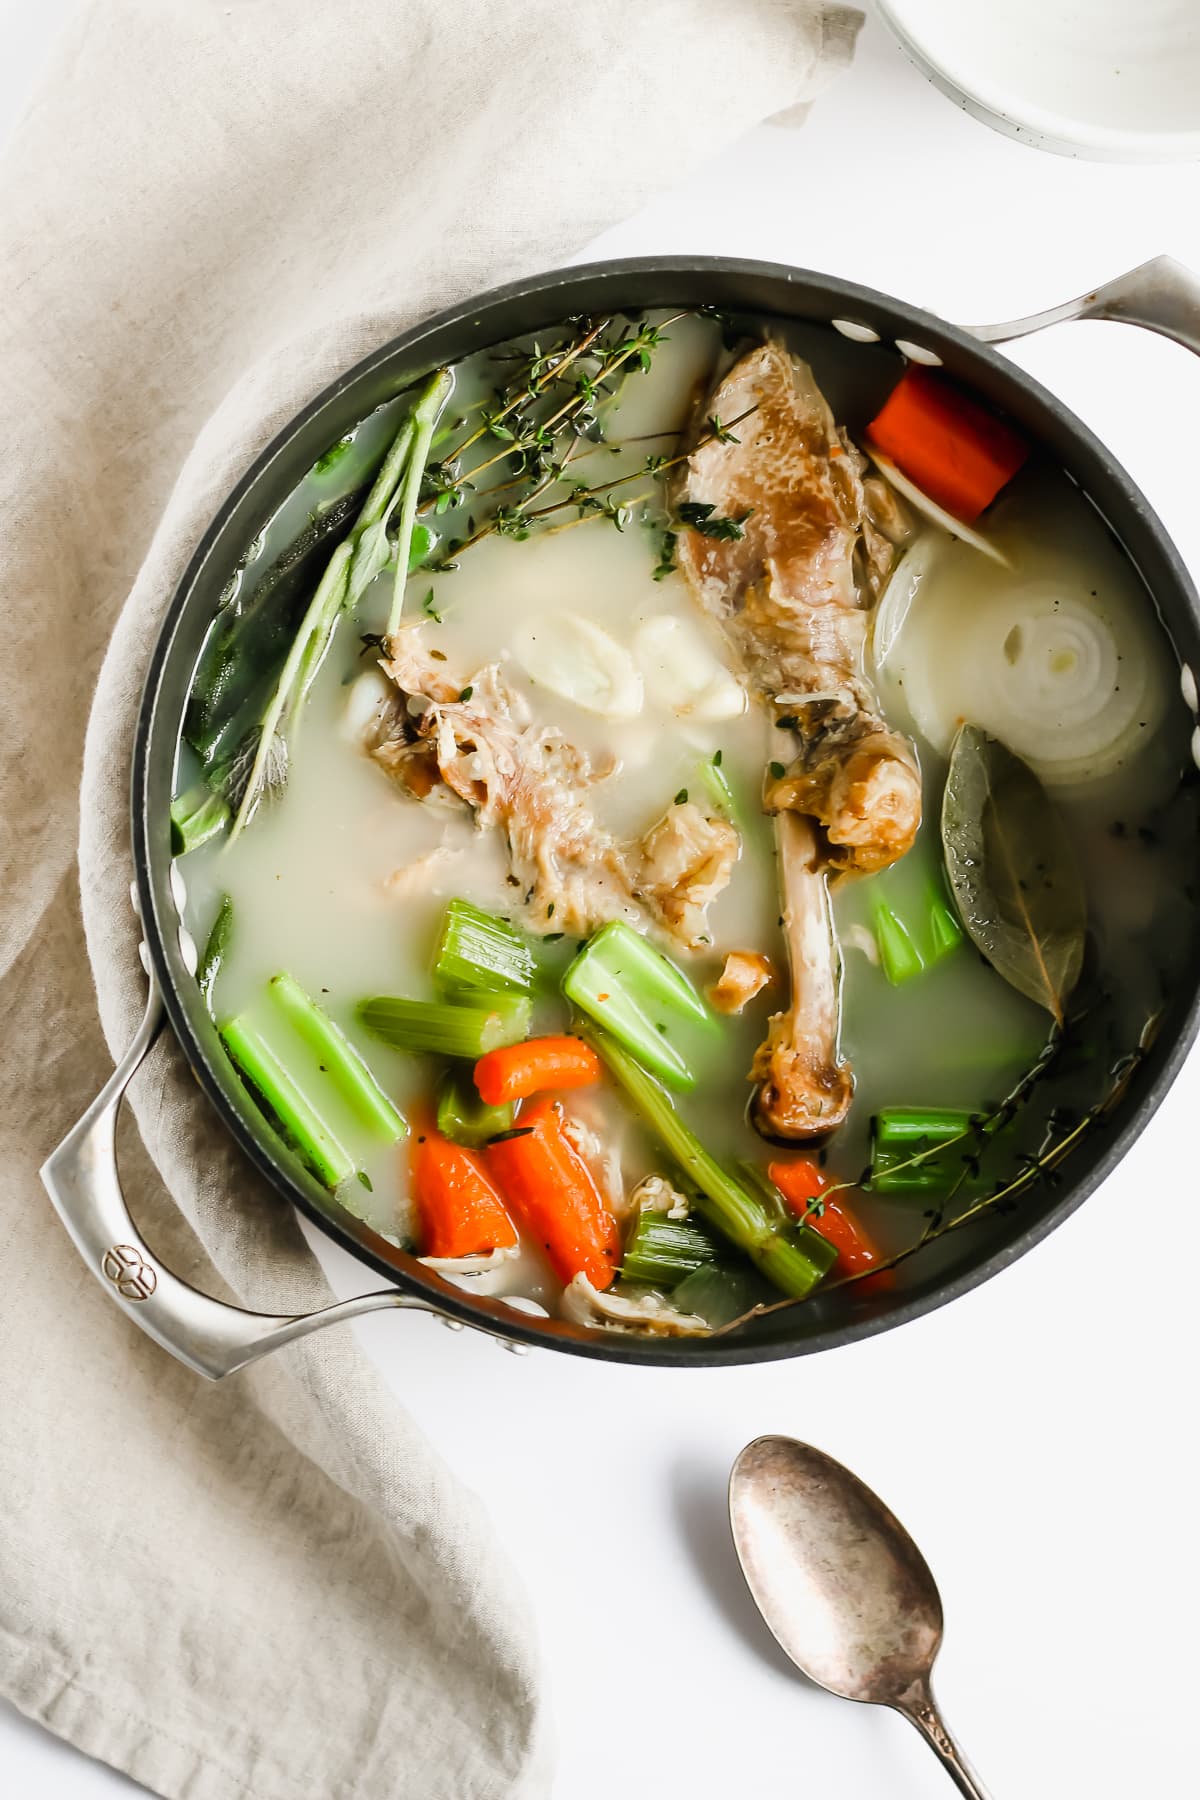 How to Make the Best Homemade Turkey Broth